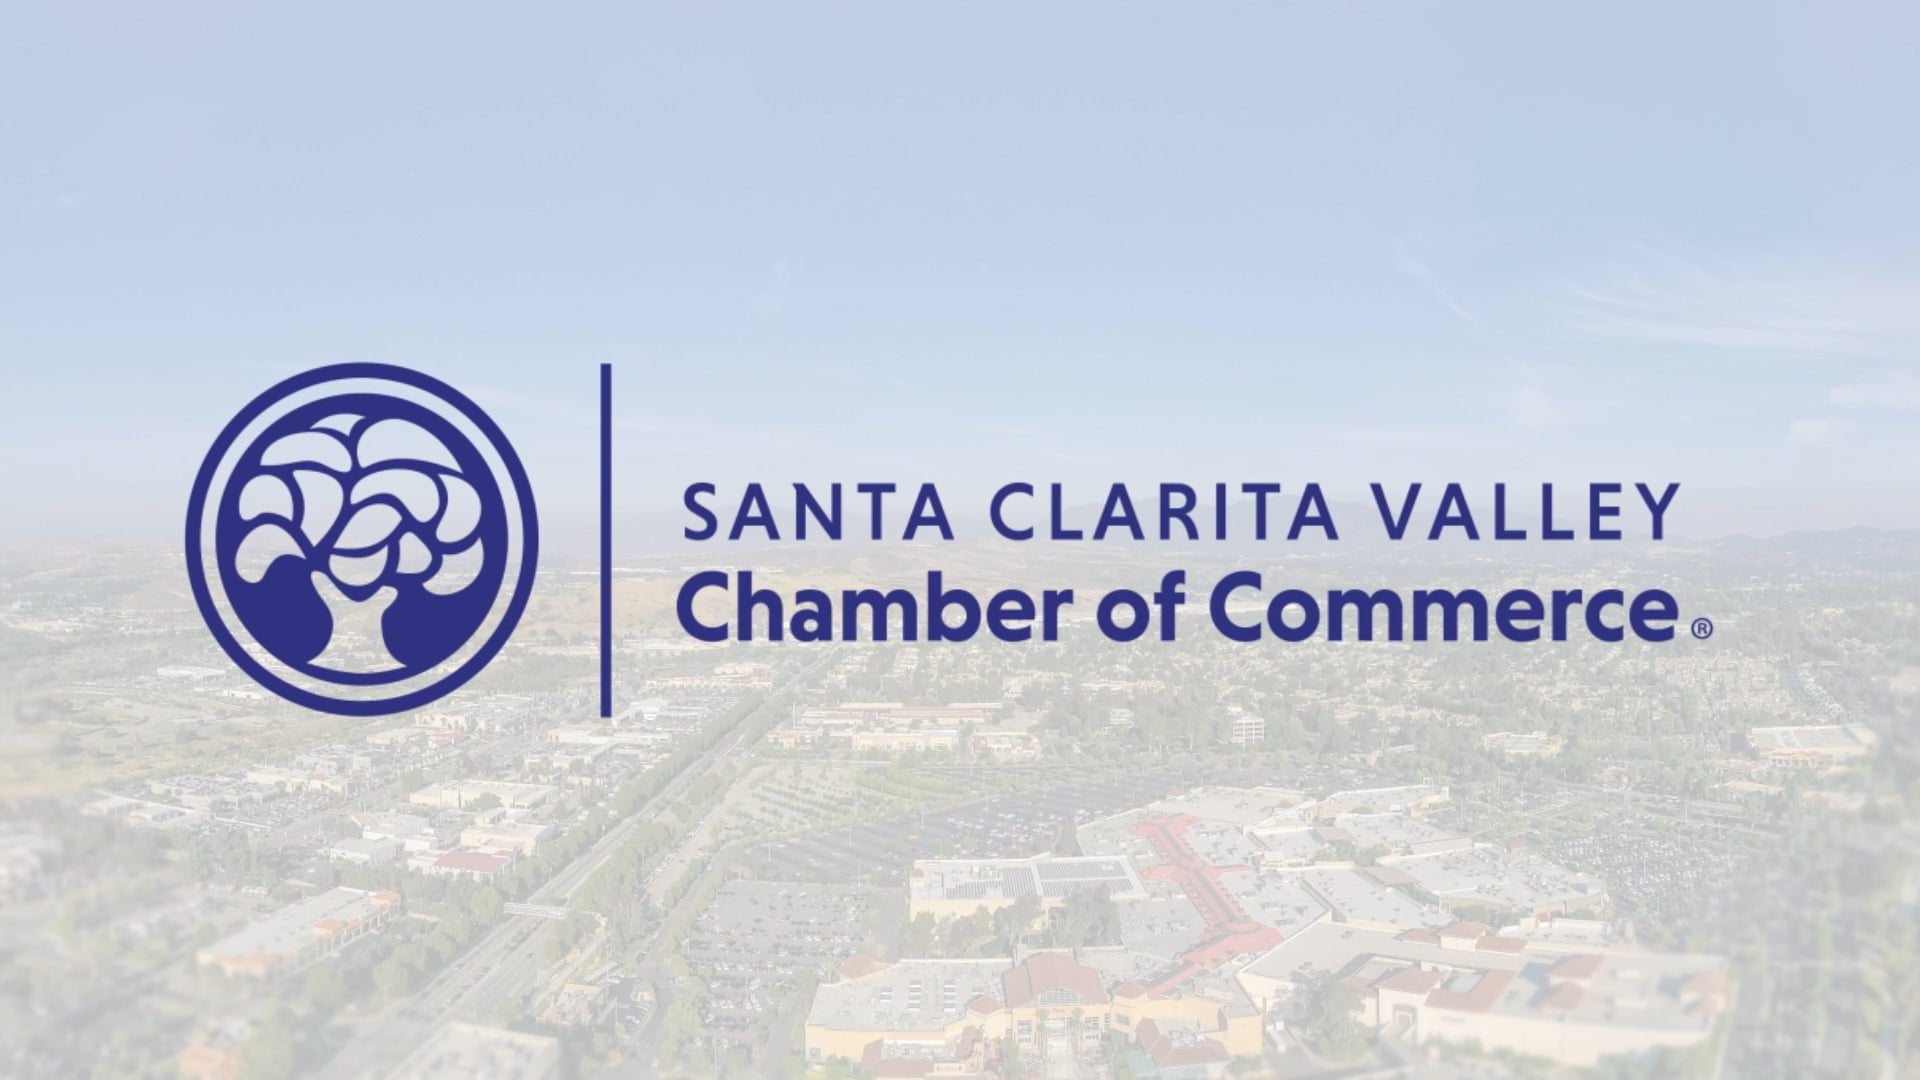 Santa Clarita Valley Chamber of Commerce - Making the Most of Your Membership